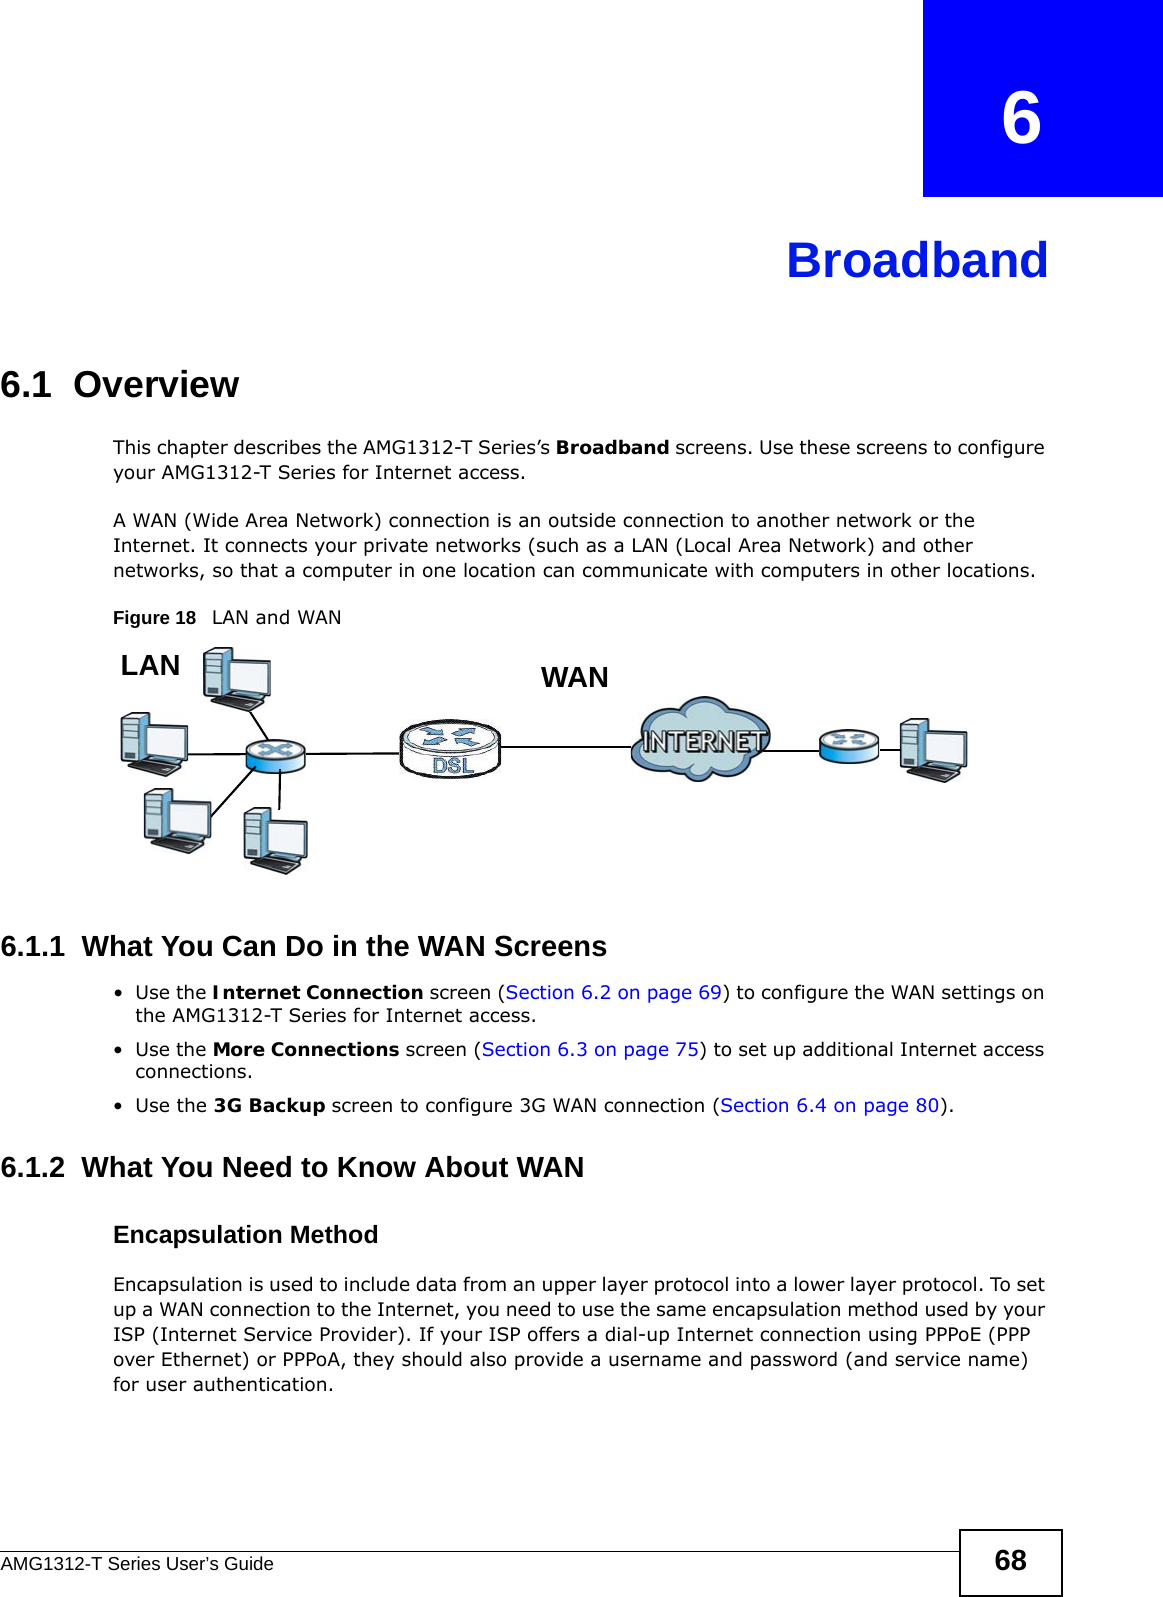 AMG1312-T Series User’s Guide 68CHAPTER   6Broadband6.1  OverviewThis chapter describes the AMG1312-T Series’s Broadband screens. Use these screens to configure your AMG1312-T Series for Internet access.A WAN (Wide Area Network) connection is an outside connection to another network or the Internet. It connects your private networks (such as a LAN (Local Area Network) and other networks, so that a computer in one location can communicate with computers in other locations.Figure 18   LAN and WAN6.1.1  What You Can Do in the WAN Screens•Use the Internet Connection screen (Section 6.2 on page 69) to configure the WAN settings on the AMG1312-T Series for Internet access.•Use the More Connections screen (Section 6.3 on page 75) to set up additional Internet access connections.•Use the 3G Backup screen to configure 3G WAN connection (Section 6.4 on page 80).6.1.2  What You Need to Know About WANEncapsulation MethodEncapsulation is used to include data from an upper layer protocol into a lower layer protocol. To set up a WAN connection to the Internet, you need to use the same encapsulation method used by your ISP (Internet Service Provider). If your ISP offers a dial-up Internet connection using PPPoE (PPP over Ethernet) or PPPoA, they should also provide a username and password (and service name) for user authentication.WANLAN